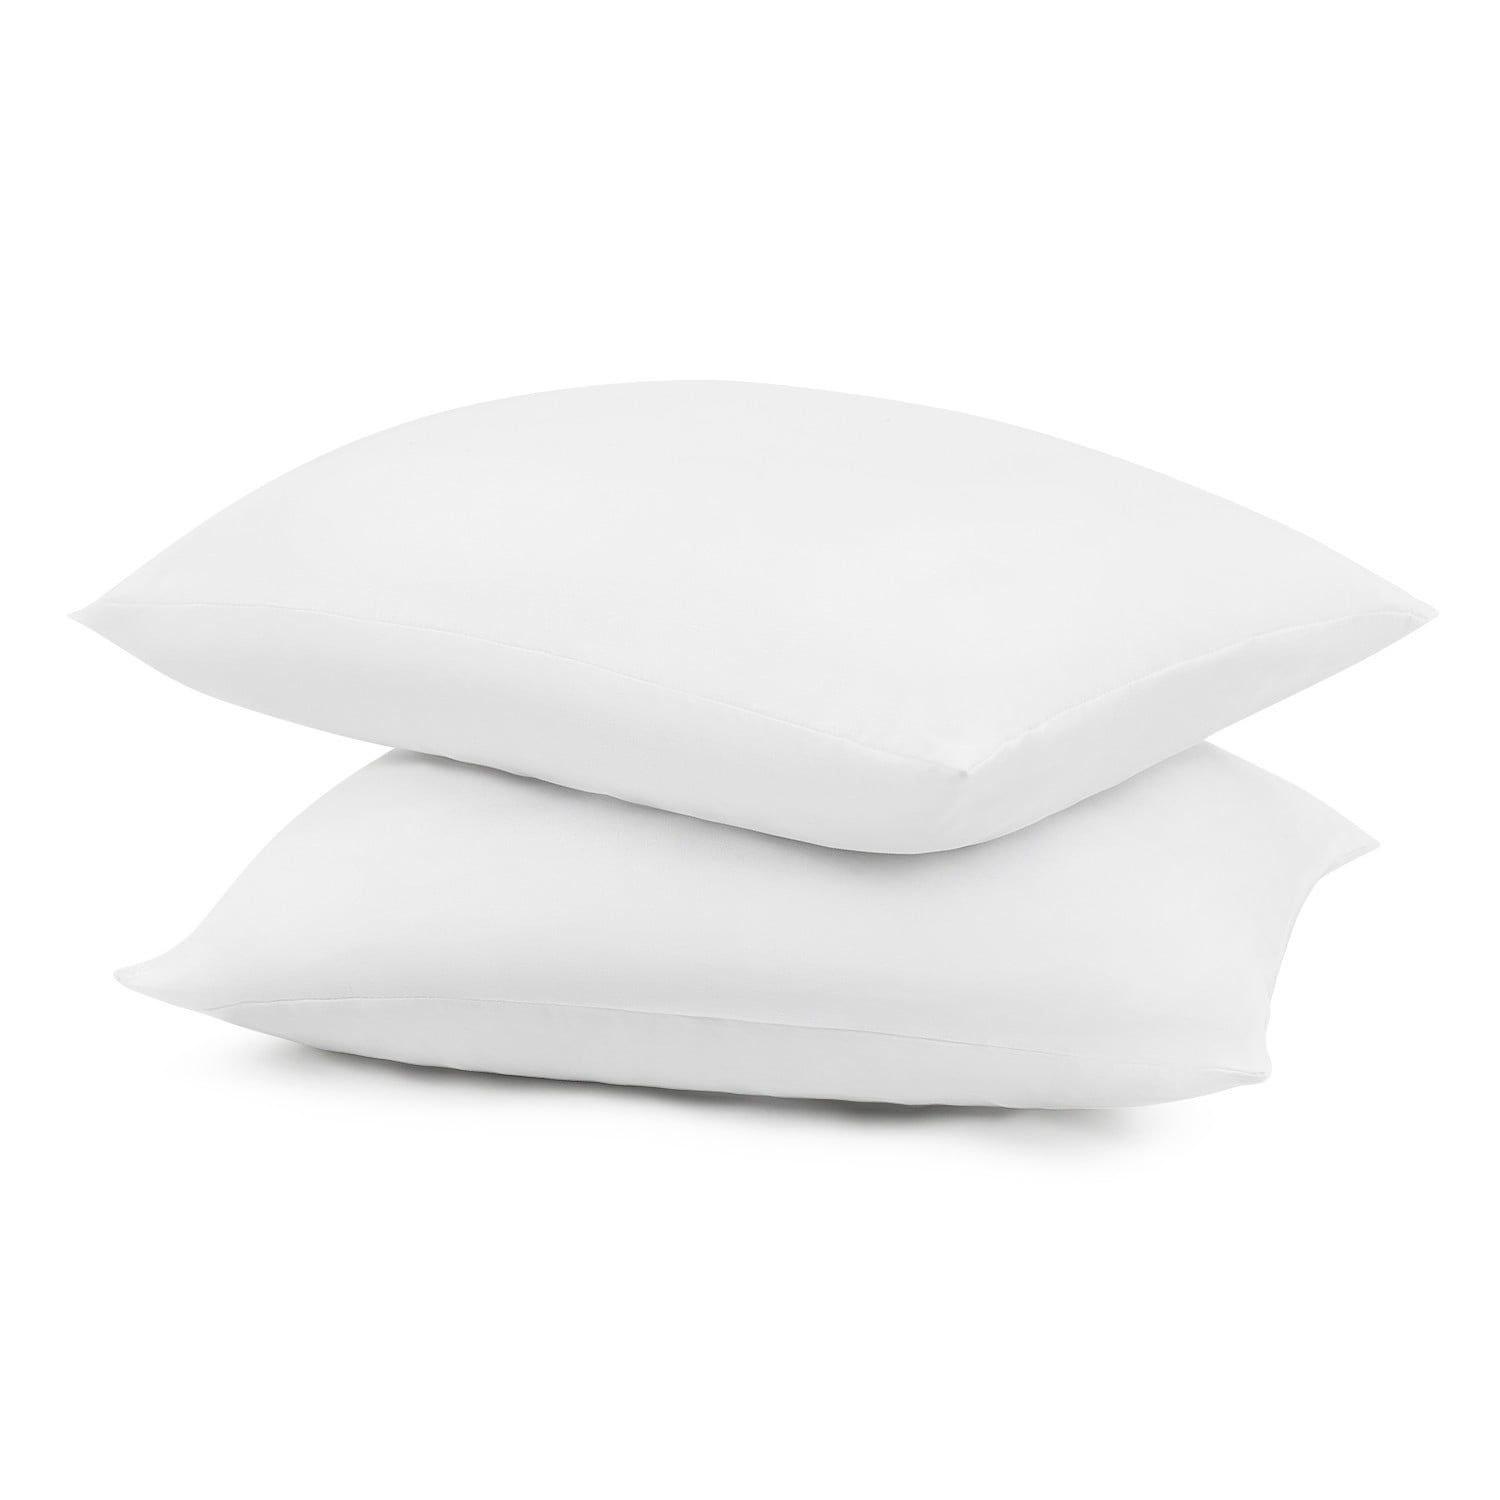 Outdoor Throw Pillow 16 in. x 16 in. Inserts Set of 4 Water Resistant  Inserts Hypoallergenic Pillow Insert B07H7G7TBL - The Home Depot